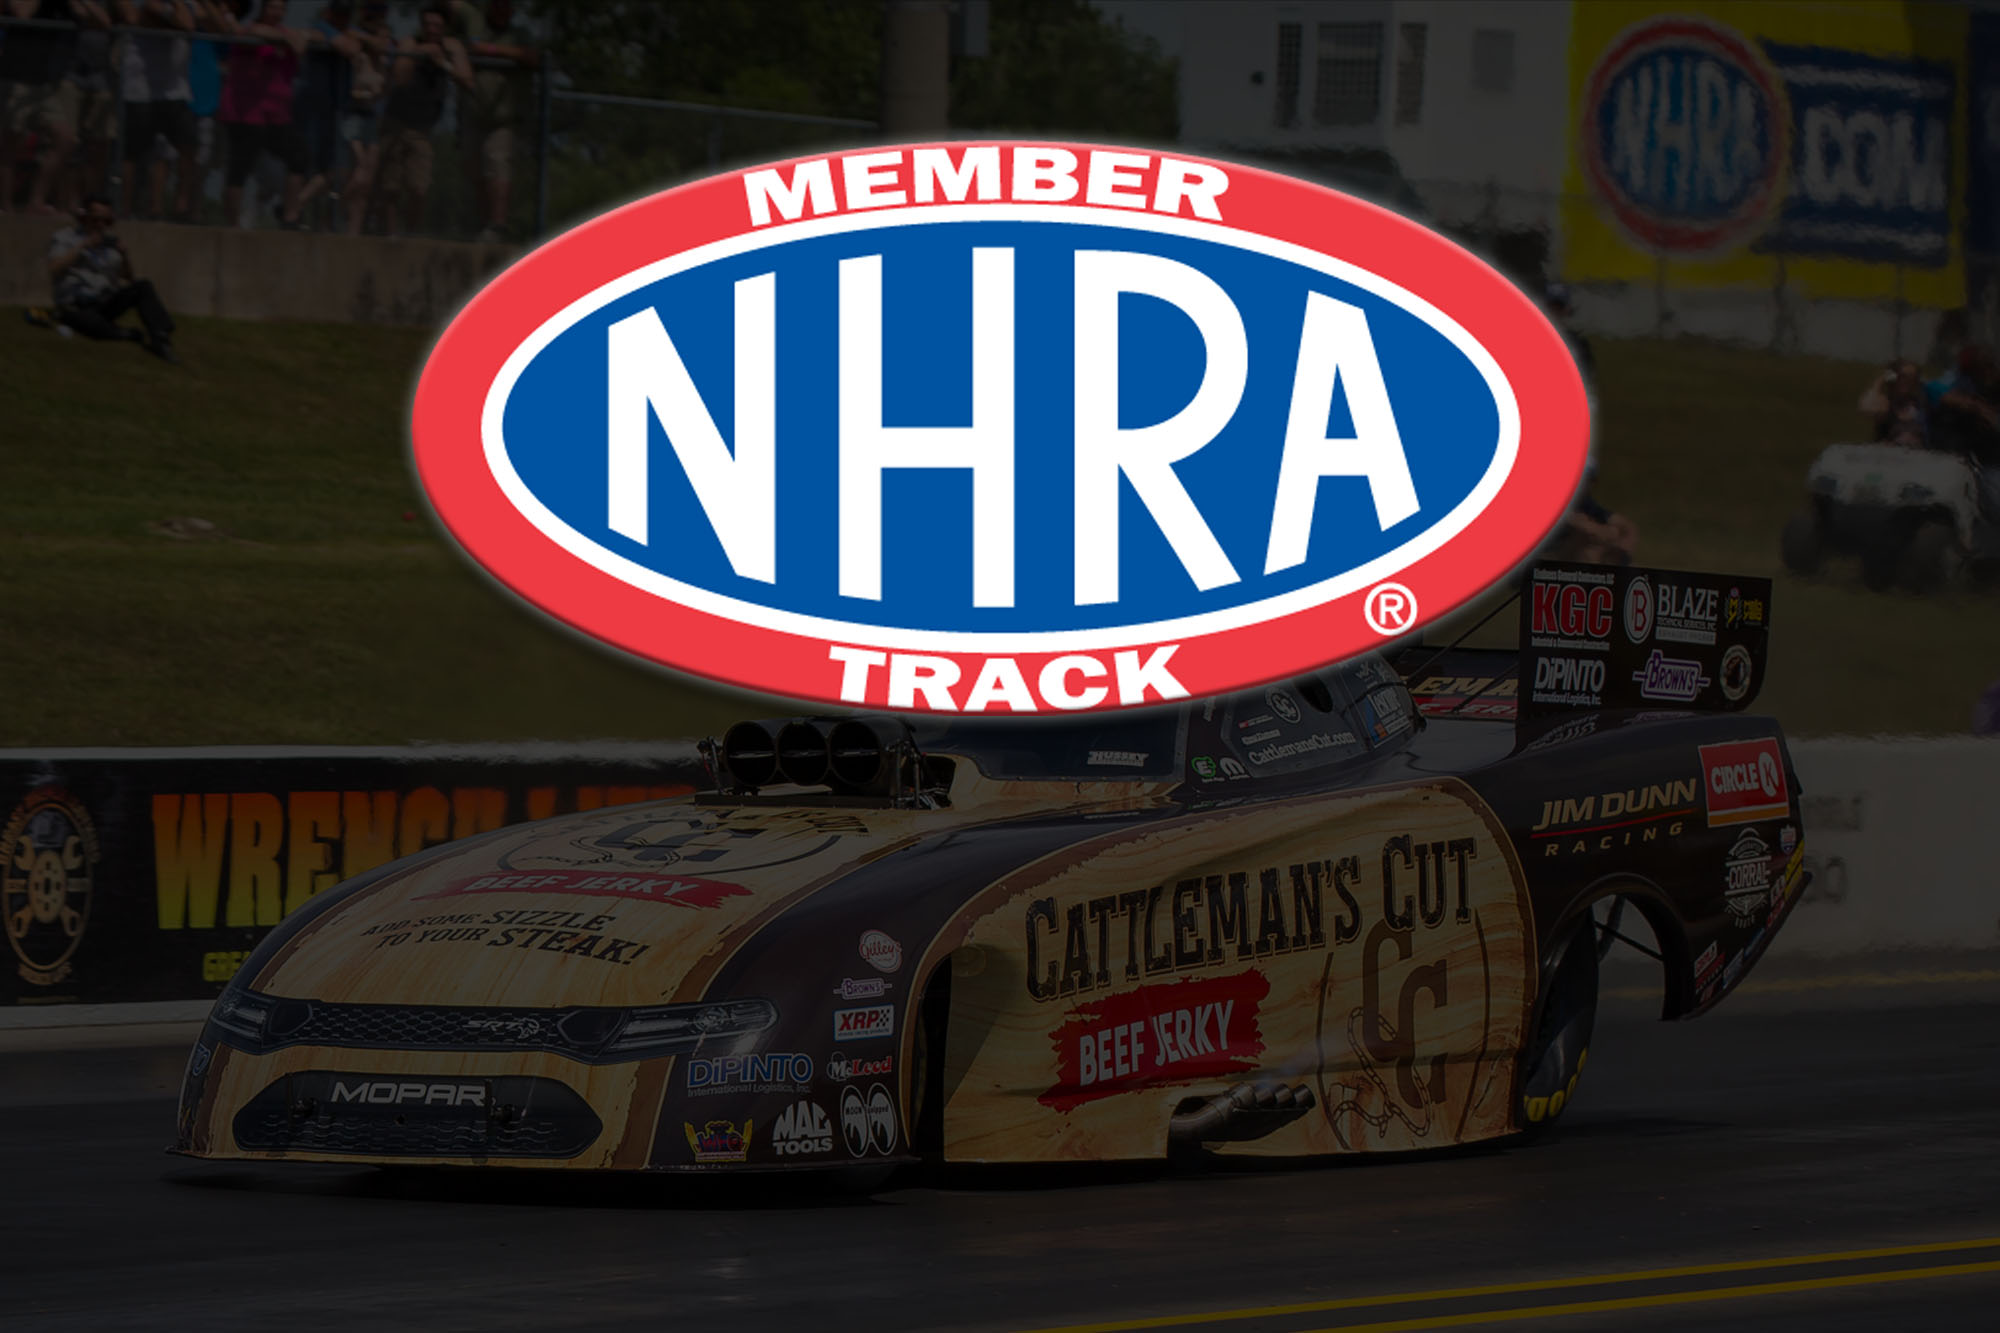 NHRA Chassis Inspection Notice in Regards to COVID-19